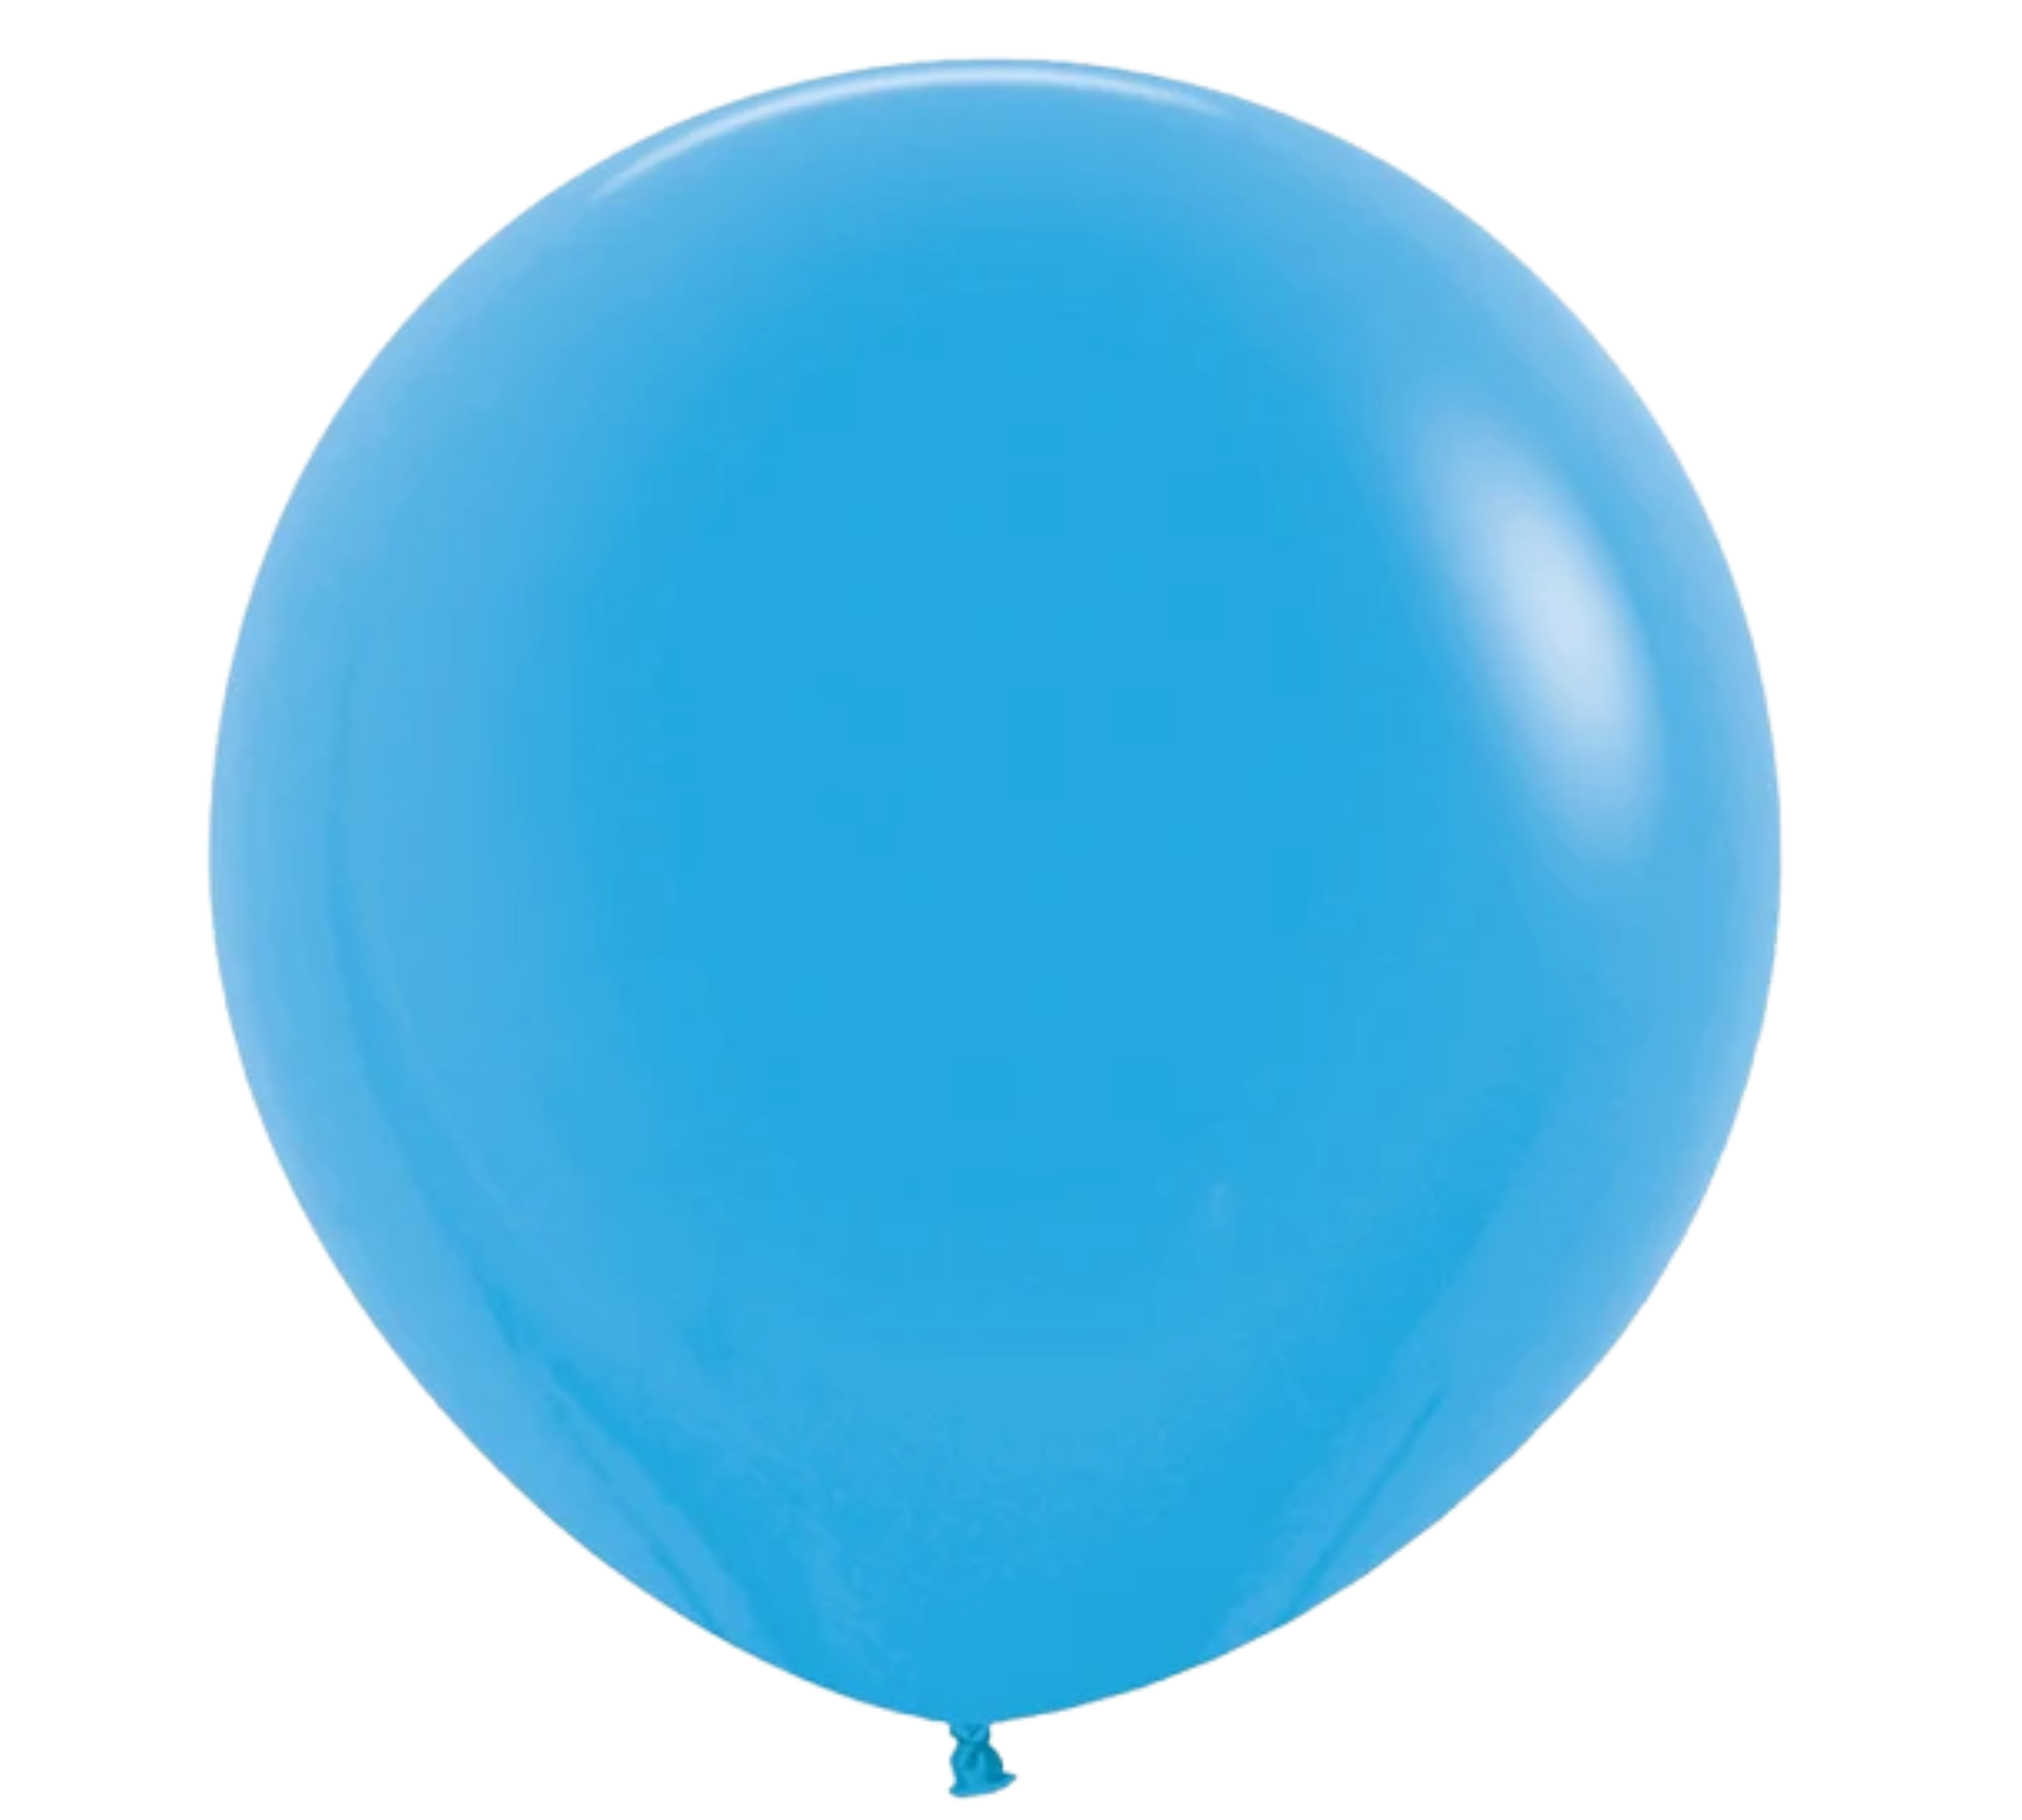 36" Sempertex Fashion Blue Latex Balloons - 3 Foot Giant Size | 2 Count